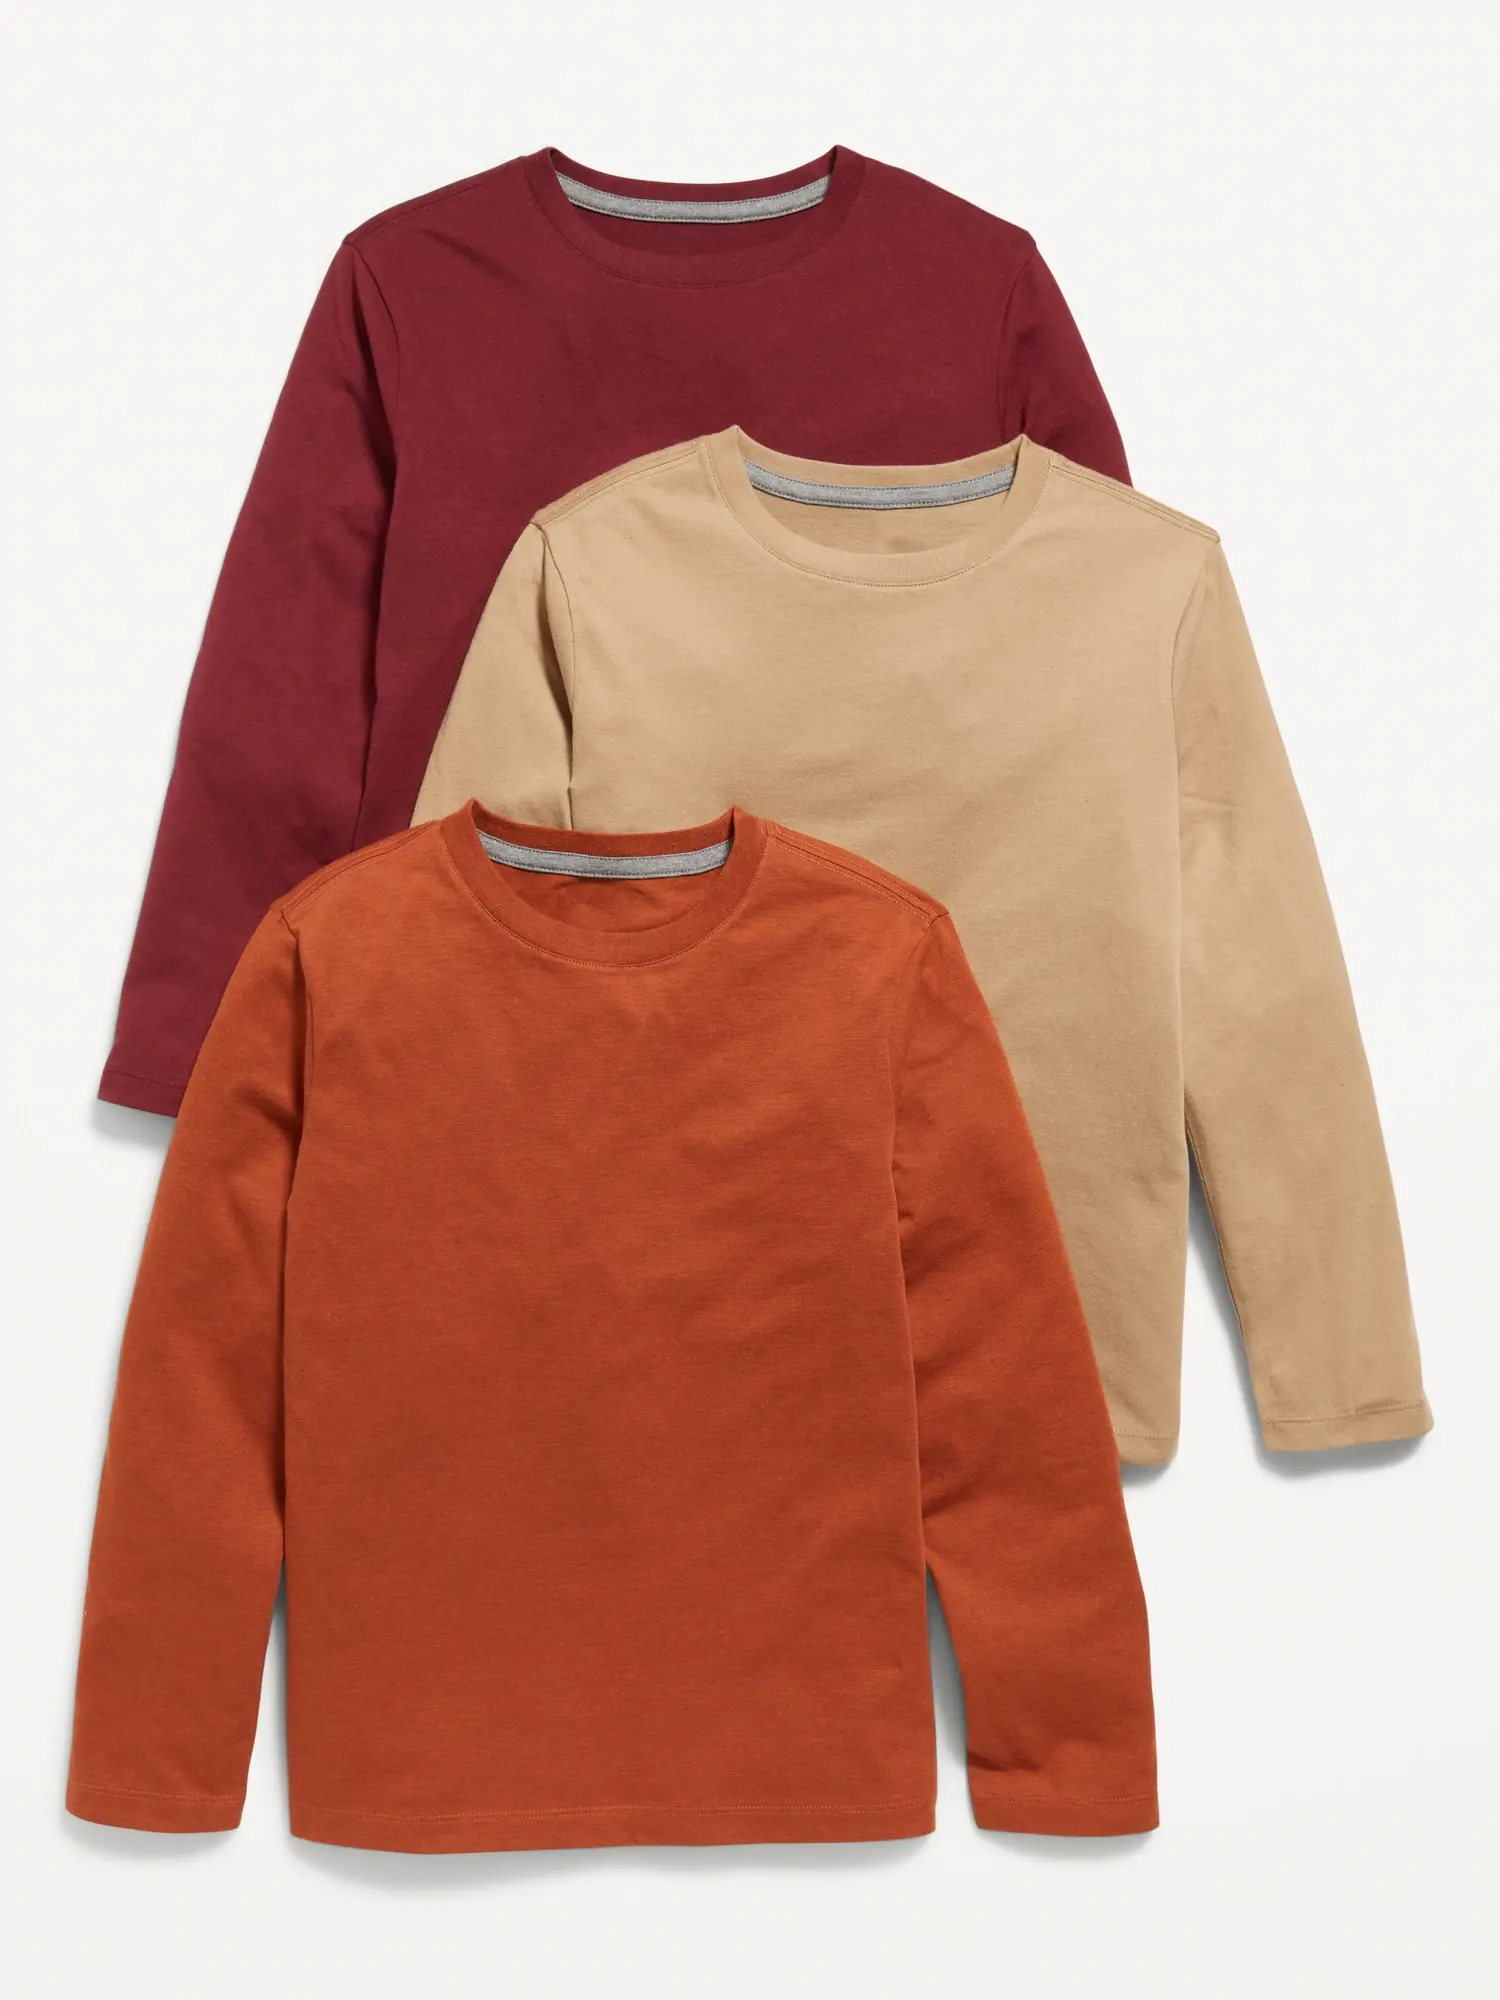 Old Navy Softest Printed Long-Sleeve T-Shirt 3-Pack for Boys red. 1